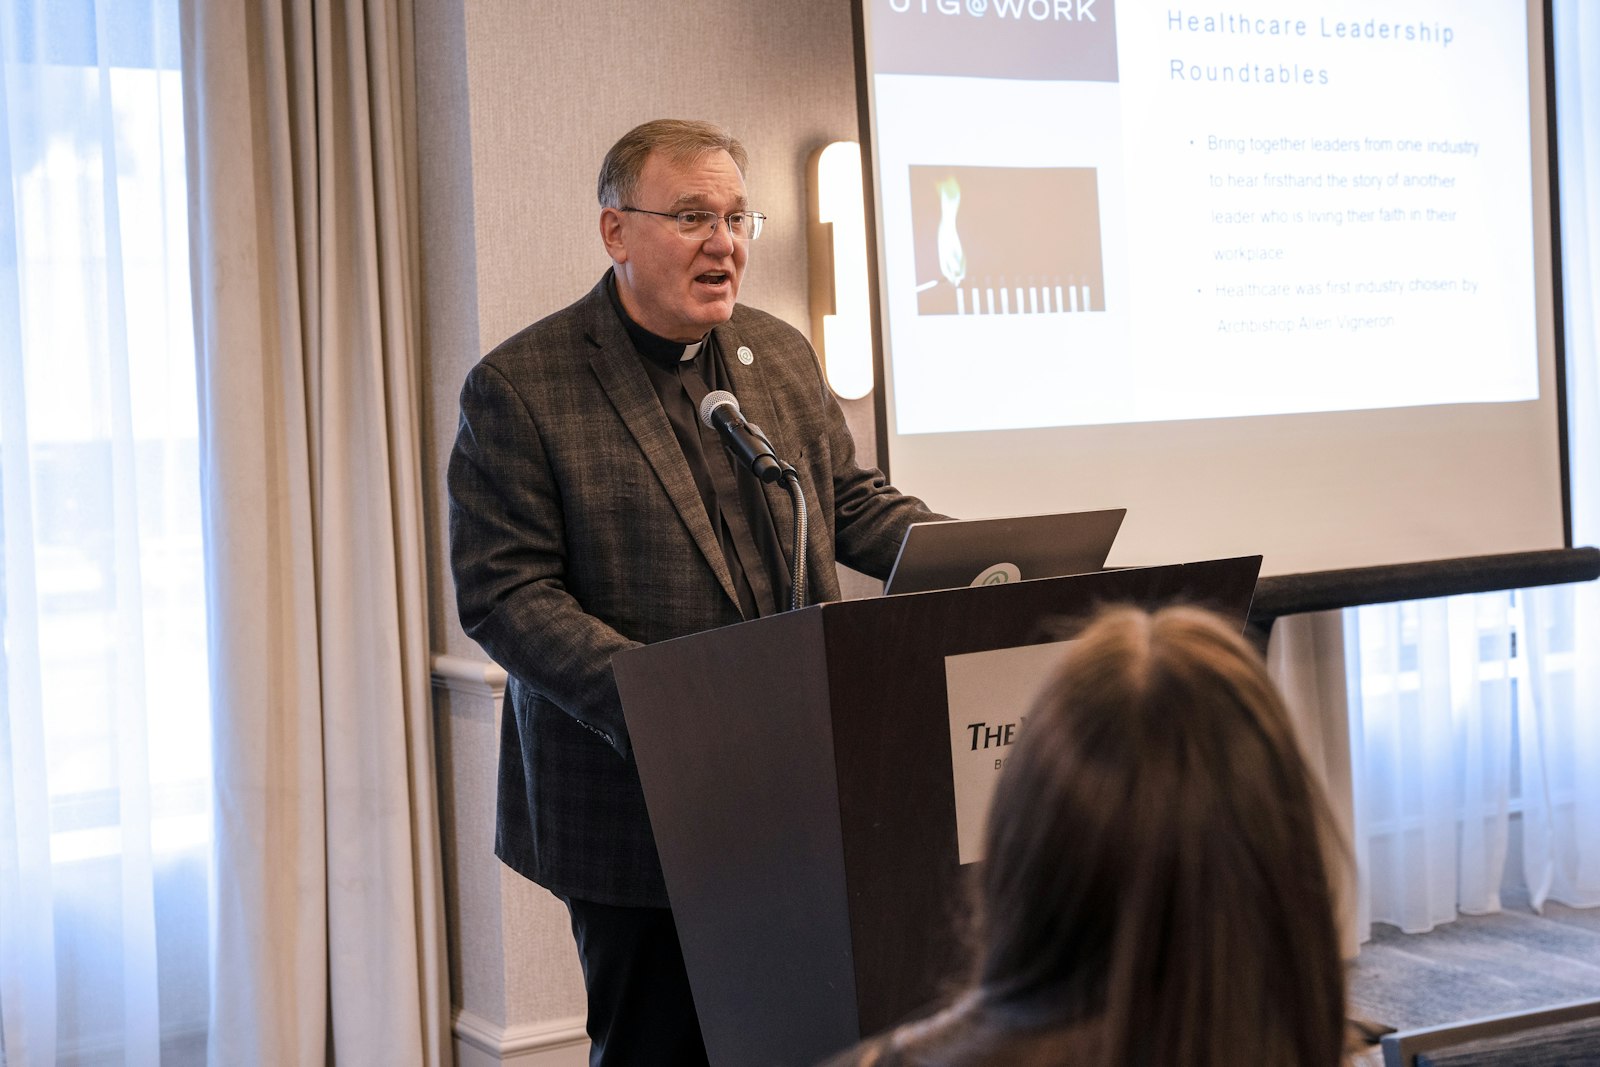 UTG at Work is led by Deacon Michael Houghton (pictured), former director of missionary strategic planning for the Archdiocese of Detroit, and Mary Martin, a former coach and team leader in the department.